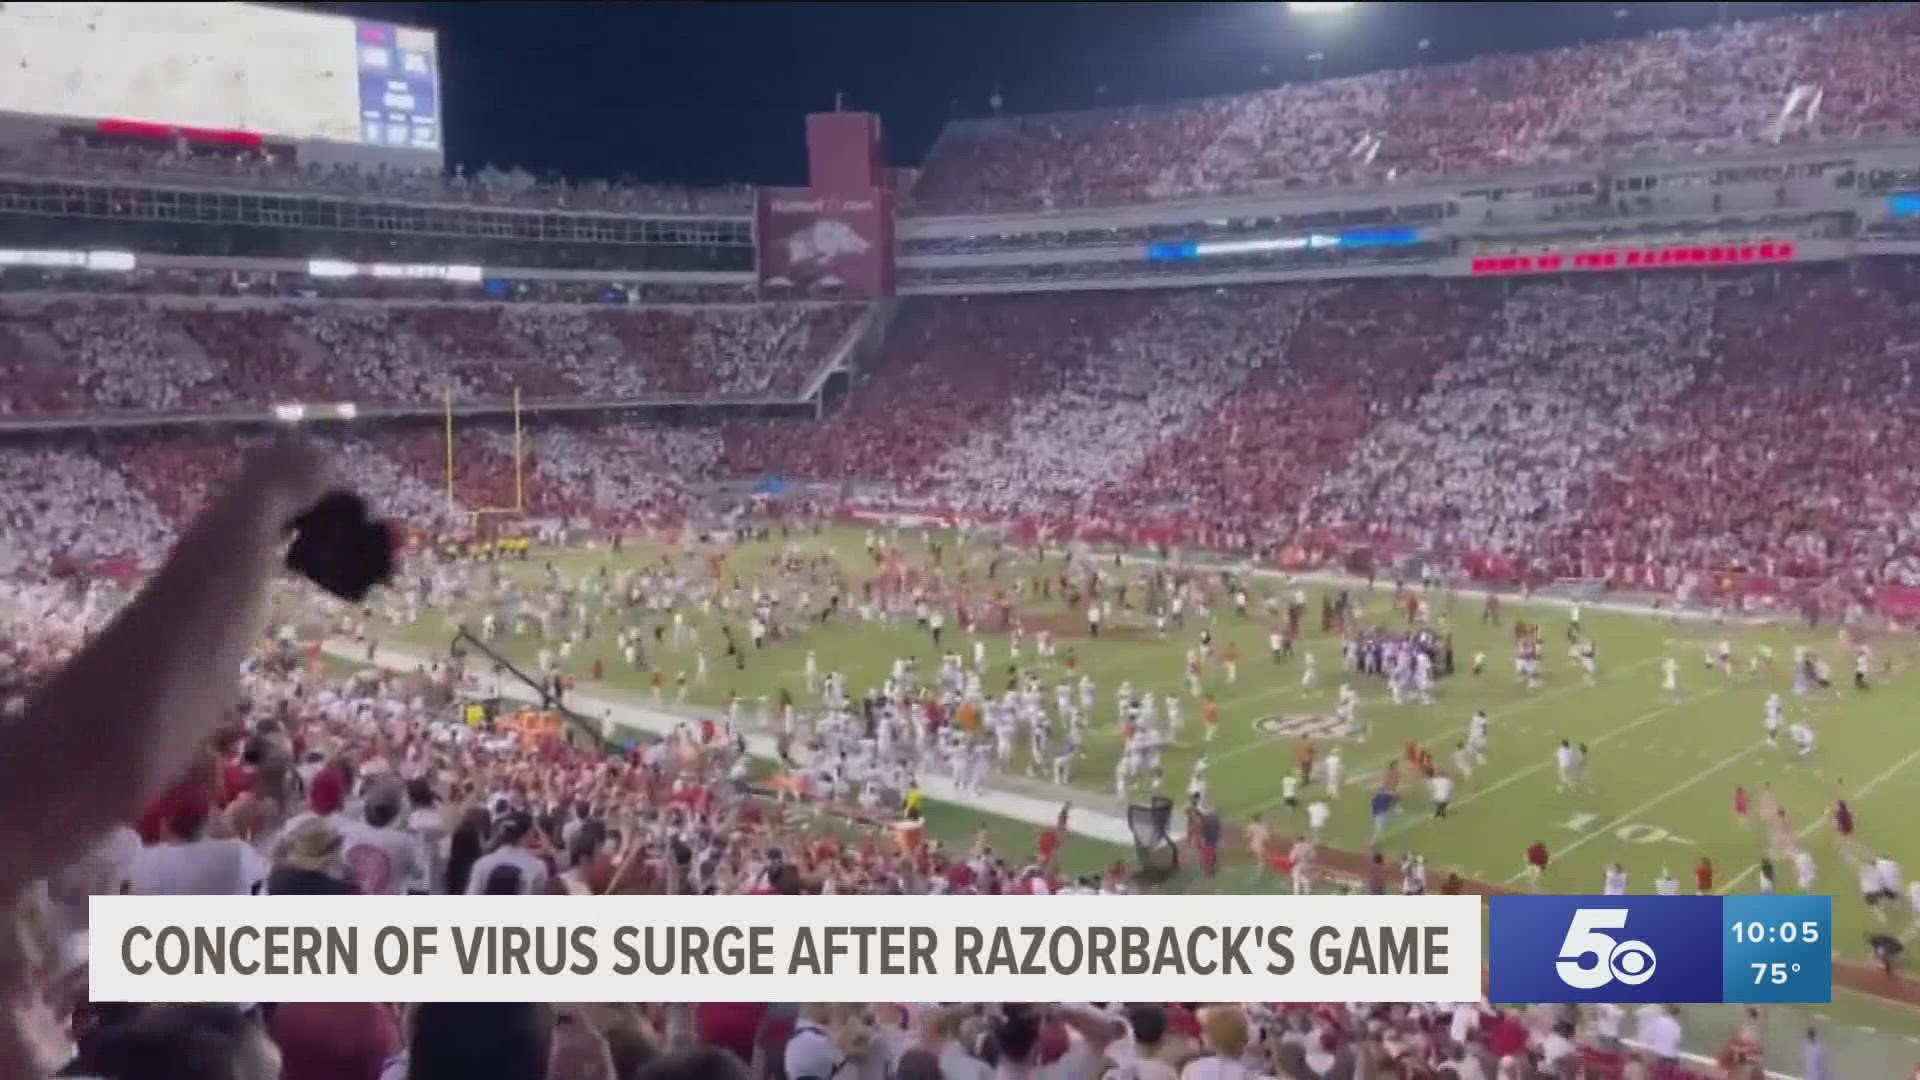 After Razorback Stadium was packed with fans over the weekend for the Texas game, COVID-19 concerns have been raised for the local area.